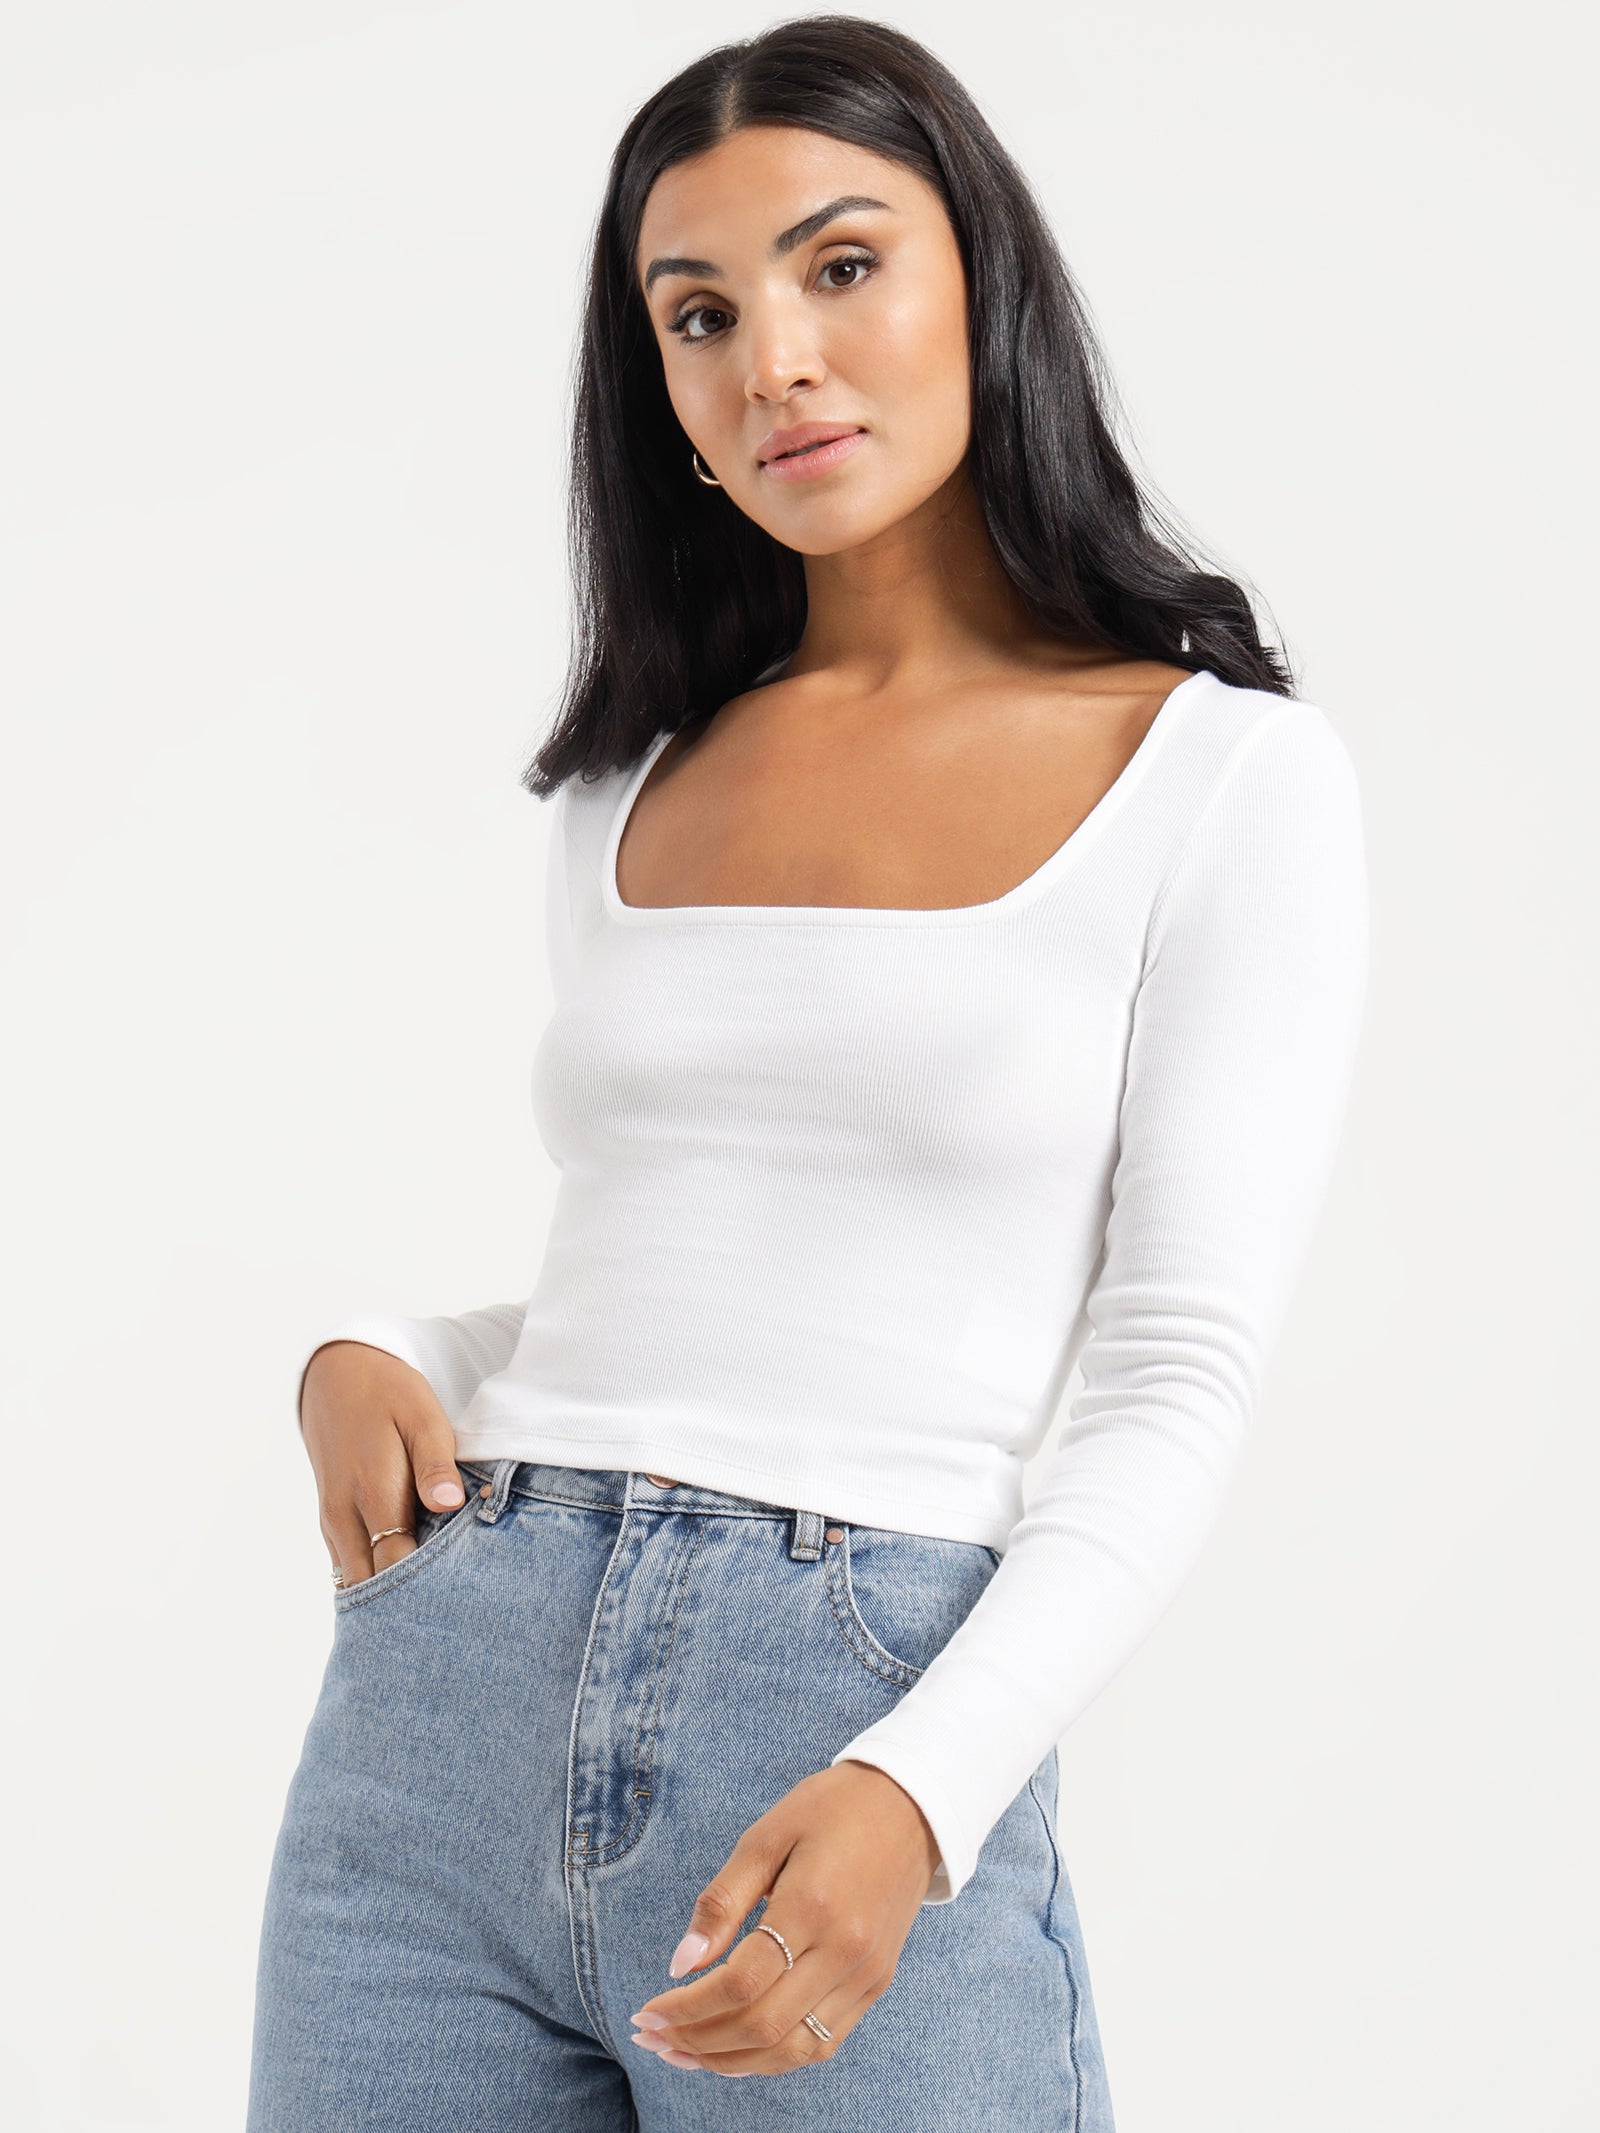 Long-Sleeve Top with Square Neckline, Regular